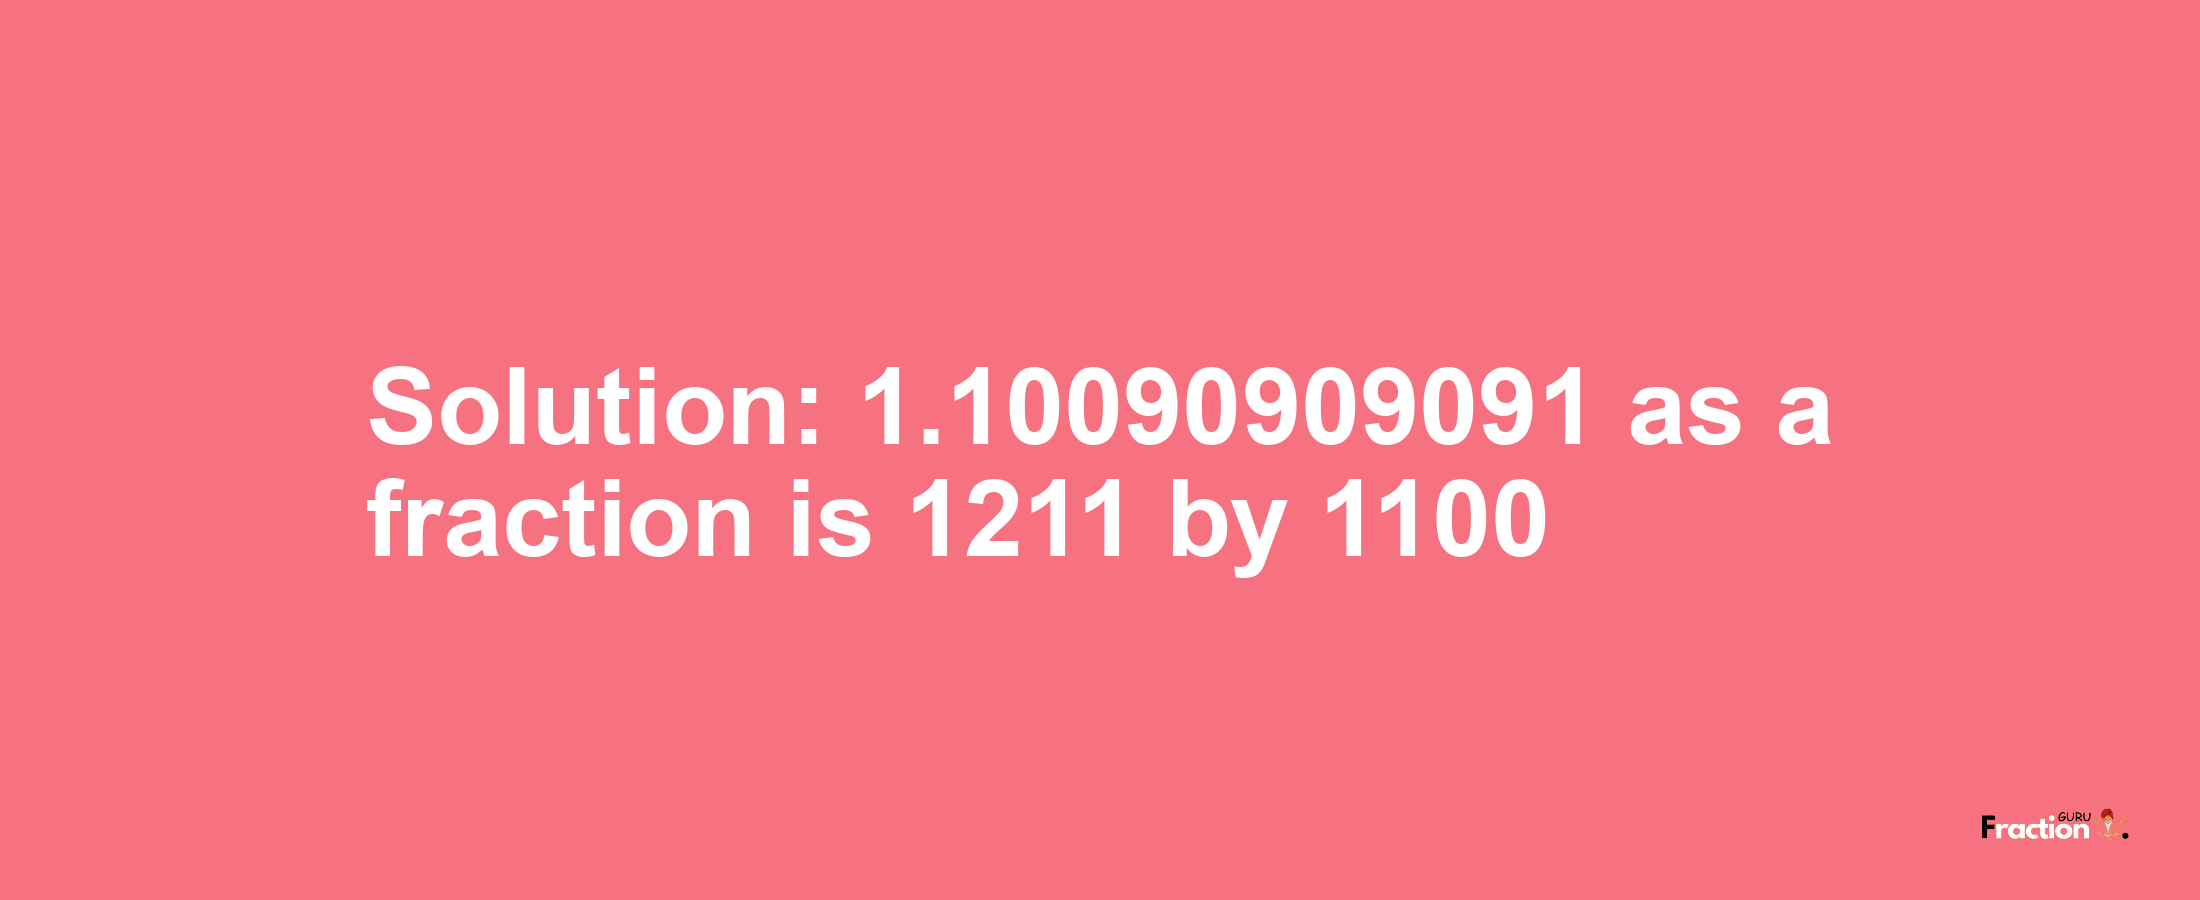 Solution:1.10090909091 as a fraction is 1211/1100